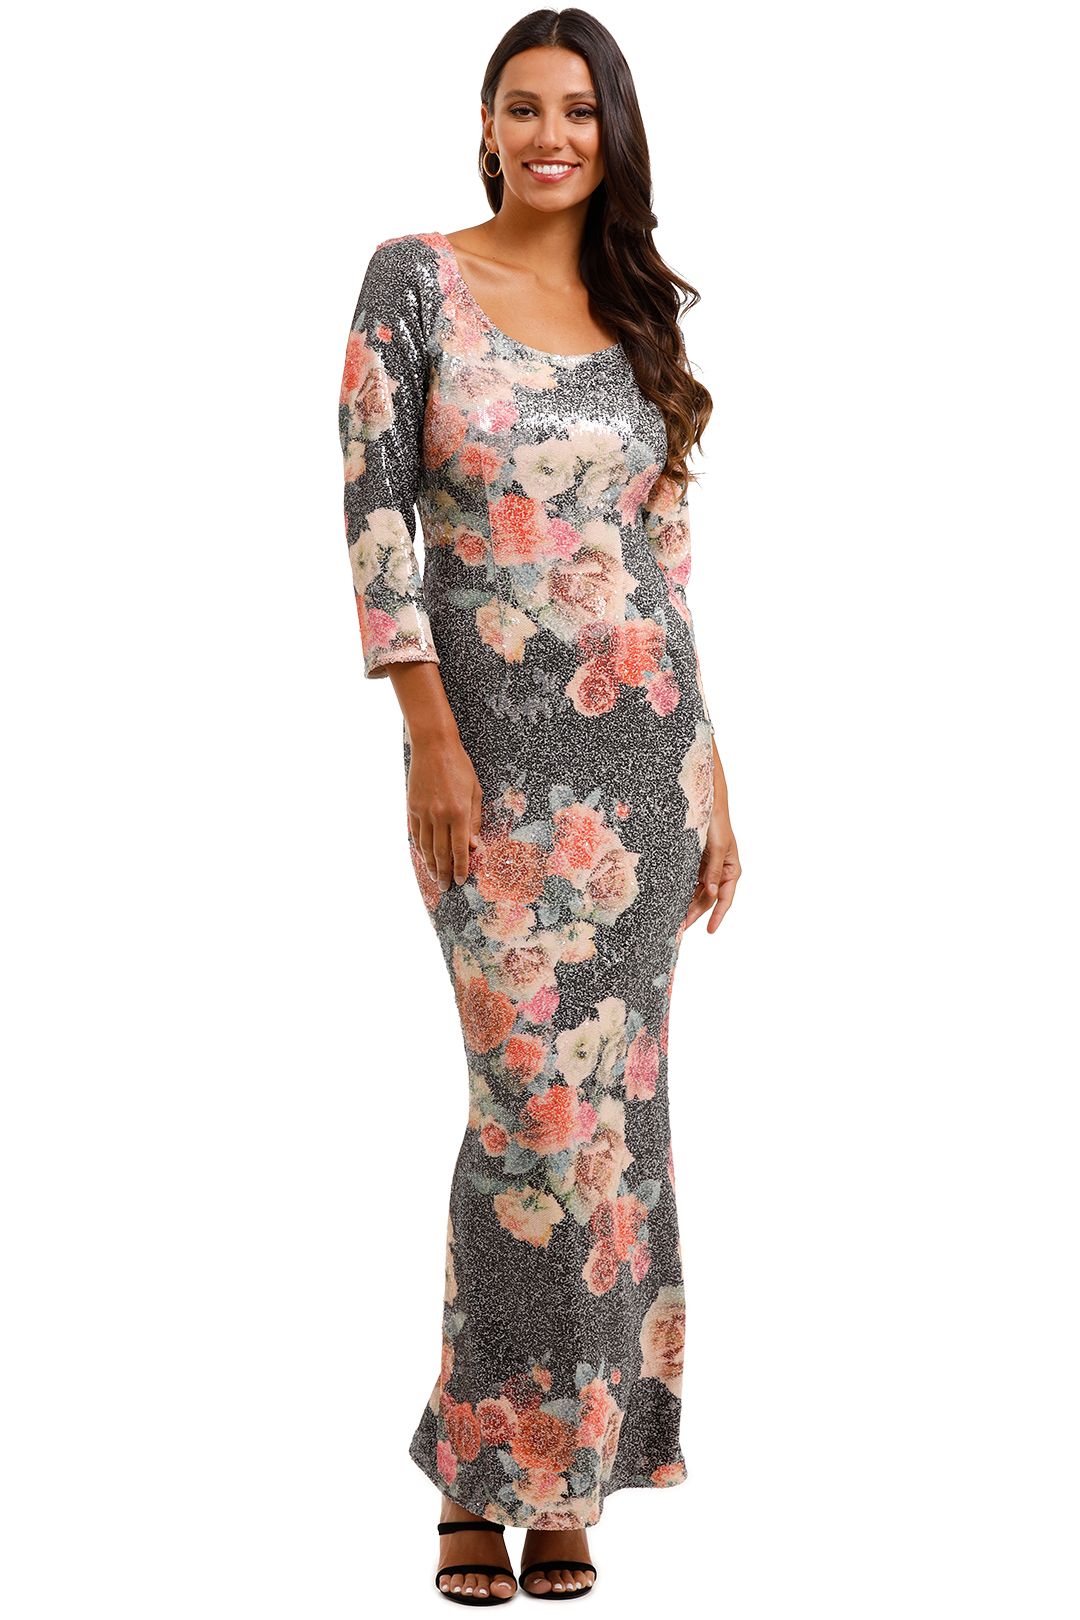 Moss and Spy	Matisse Gown Floral Multi Sequins Dress